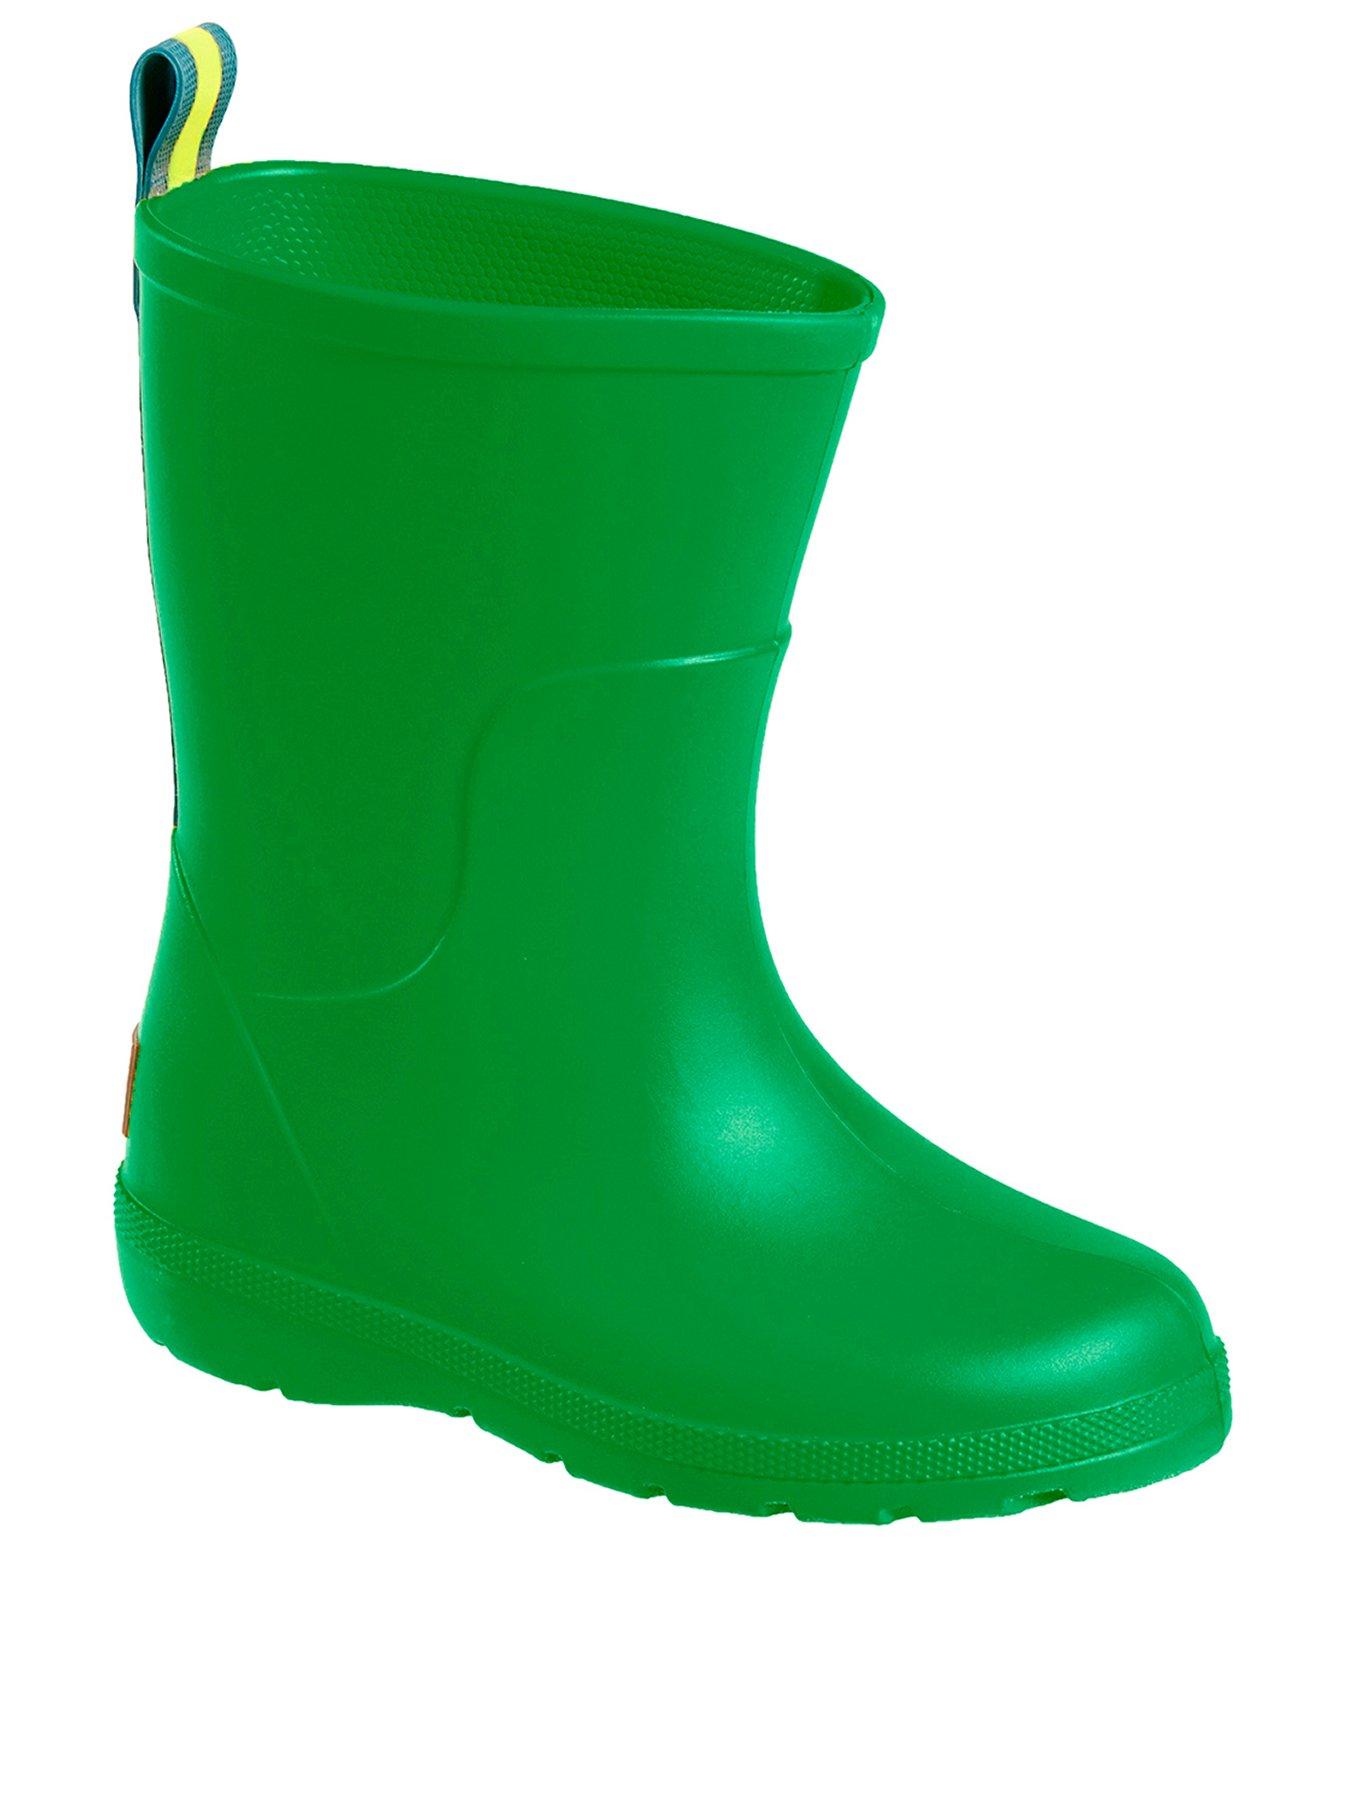 Shoes & boots Toddler Charley Rain Boot - Green